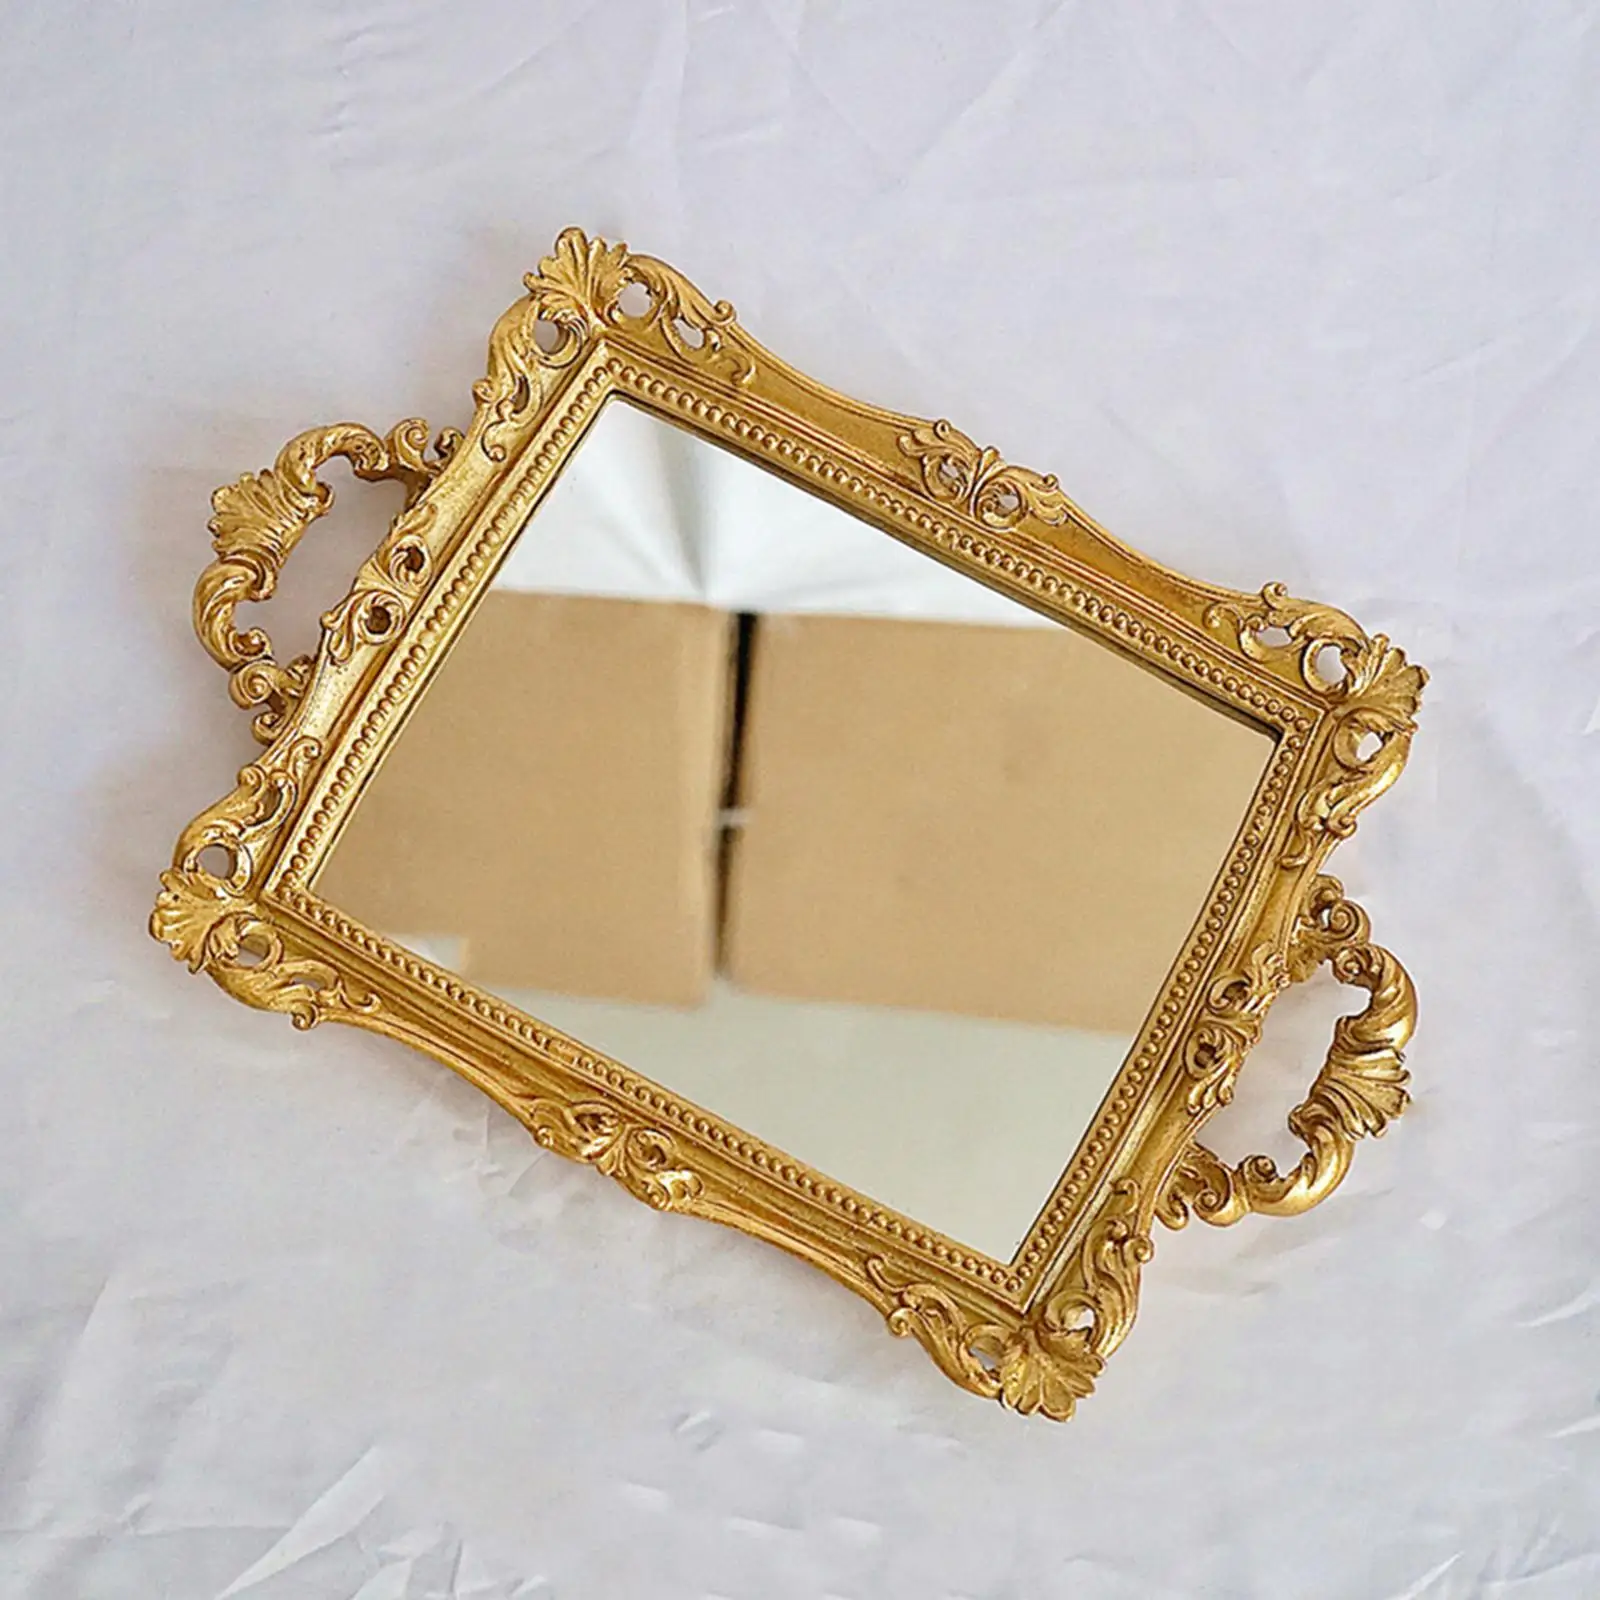 Gold Mirror Tray Cosmetic Perfume Storage Plates for Bedroom Living Room